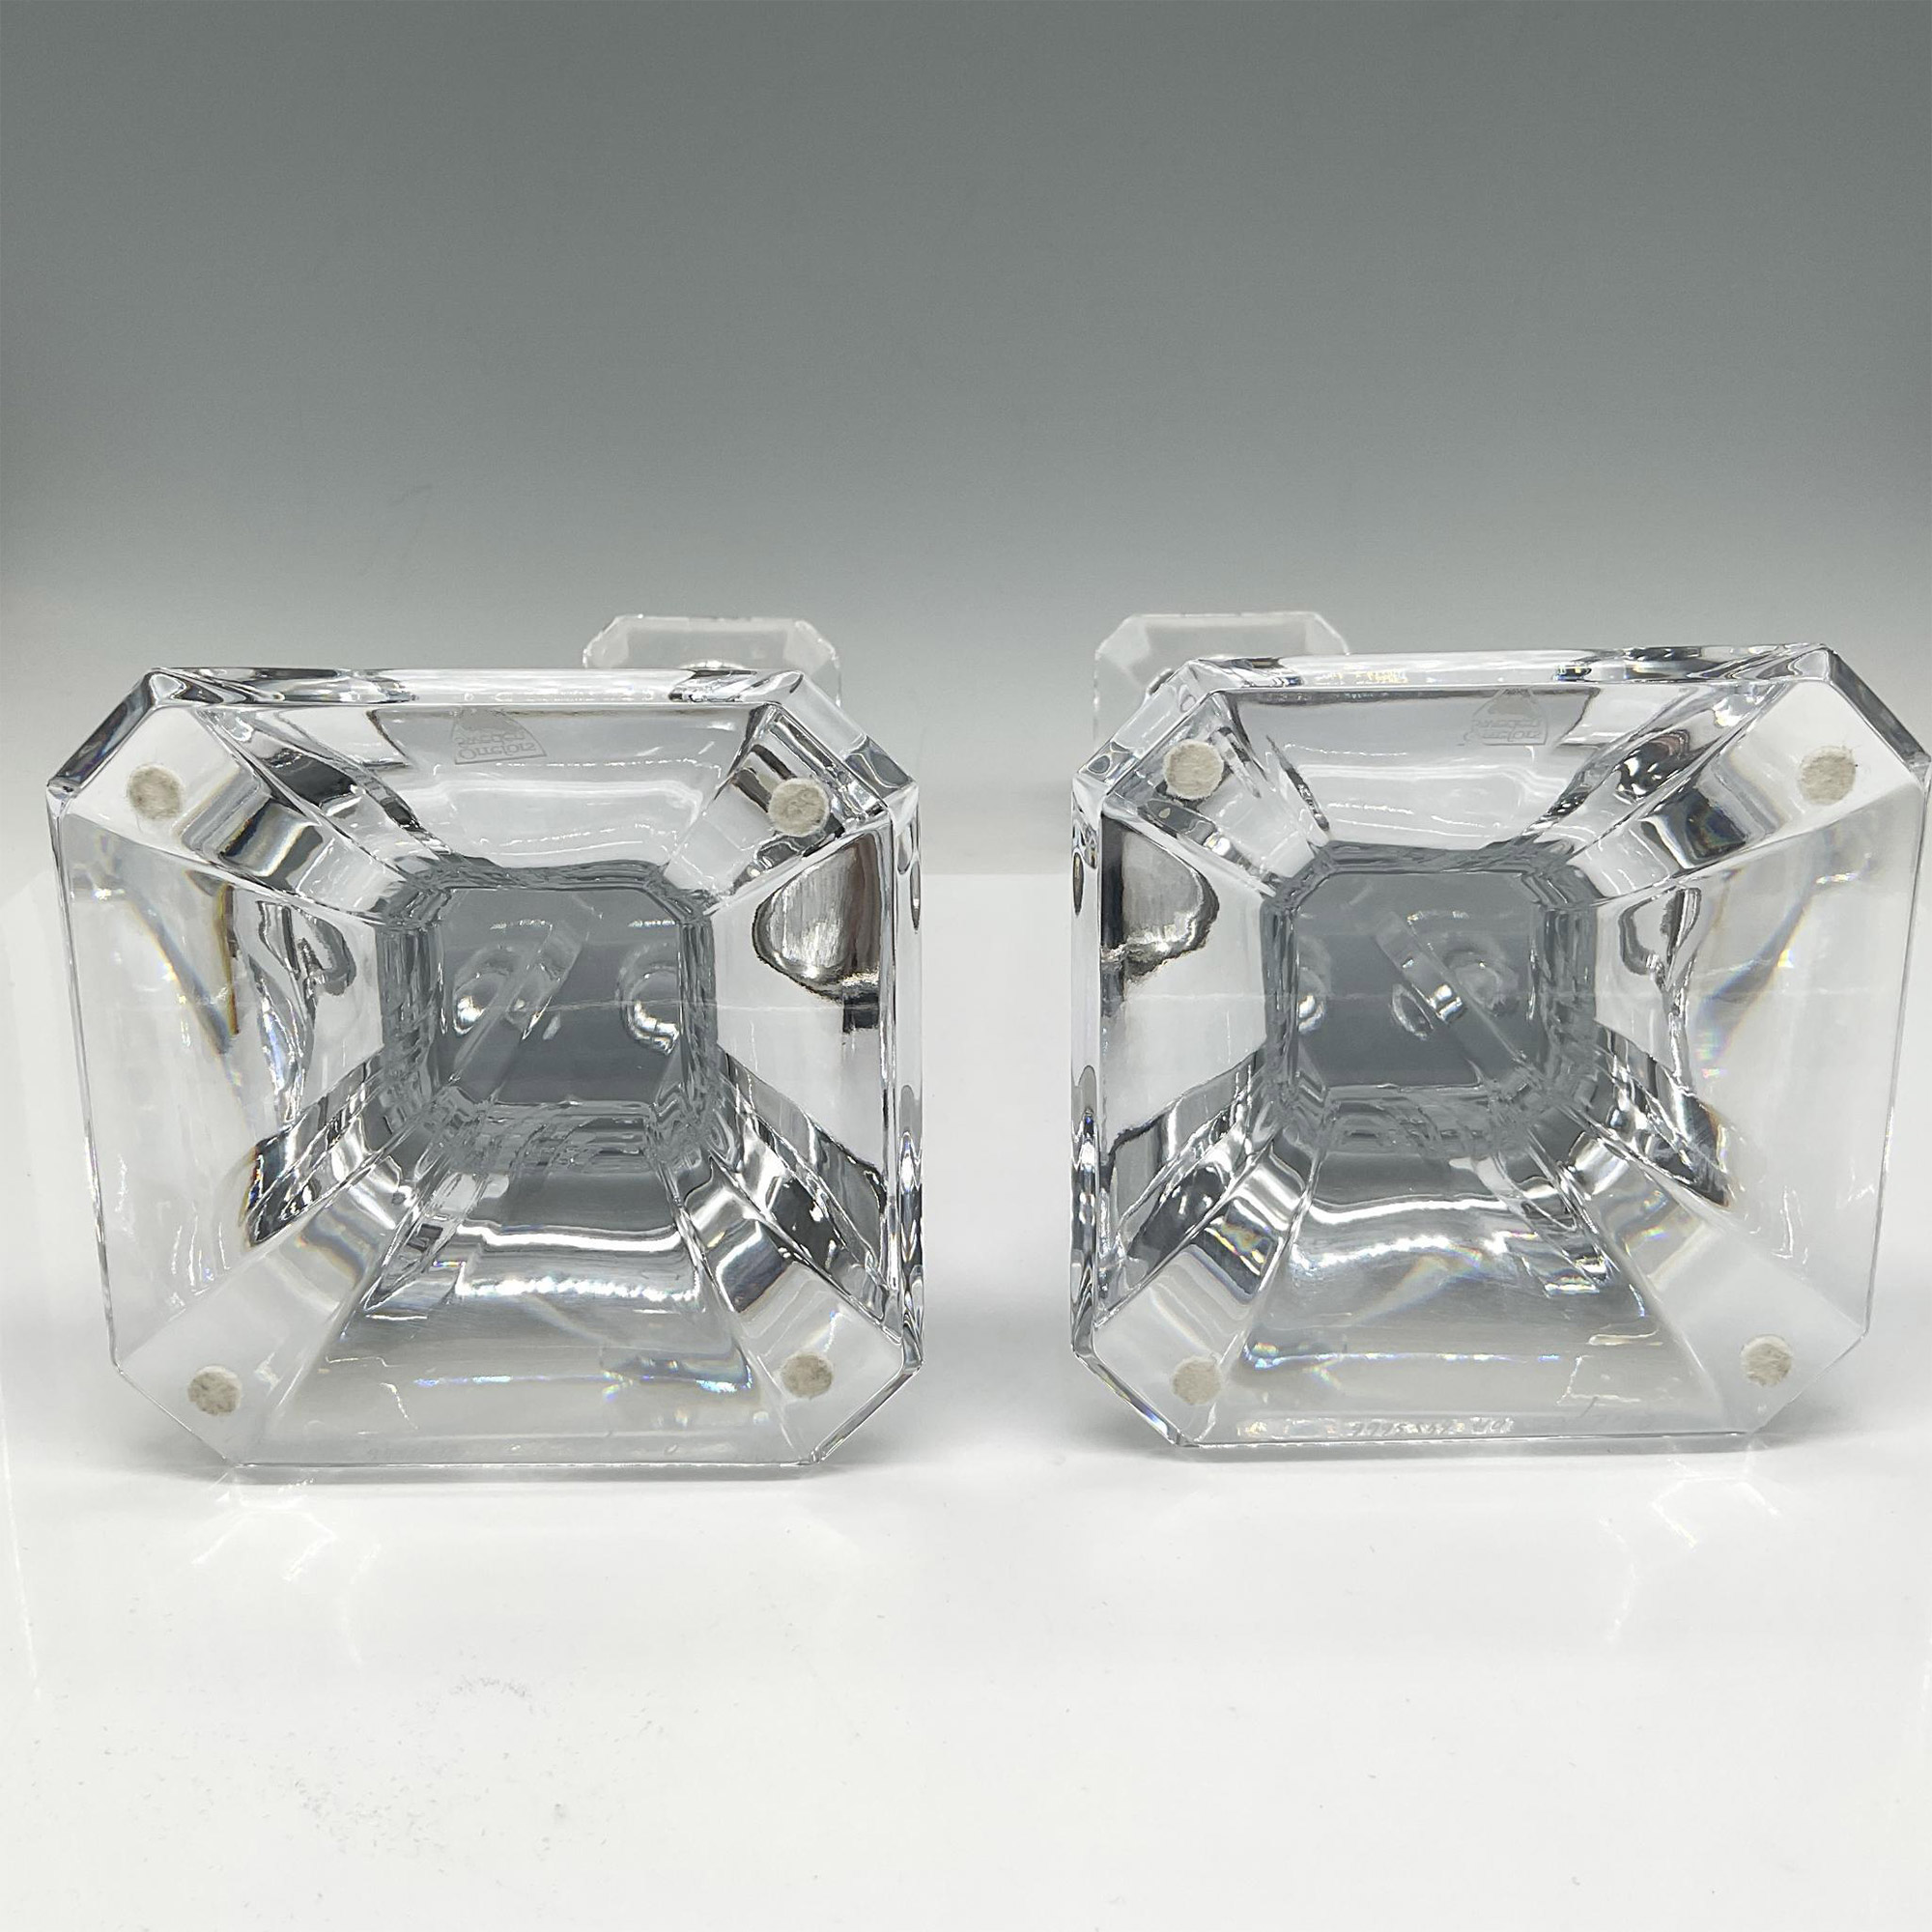 Pair of Orrefors Crystal Candle Holders - Image 4 of 4